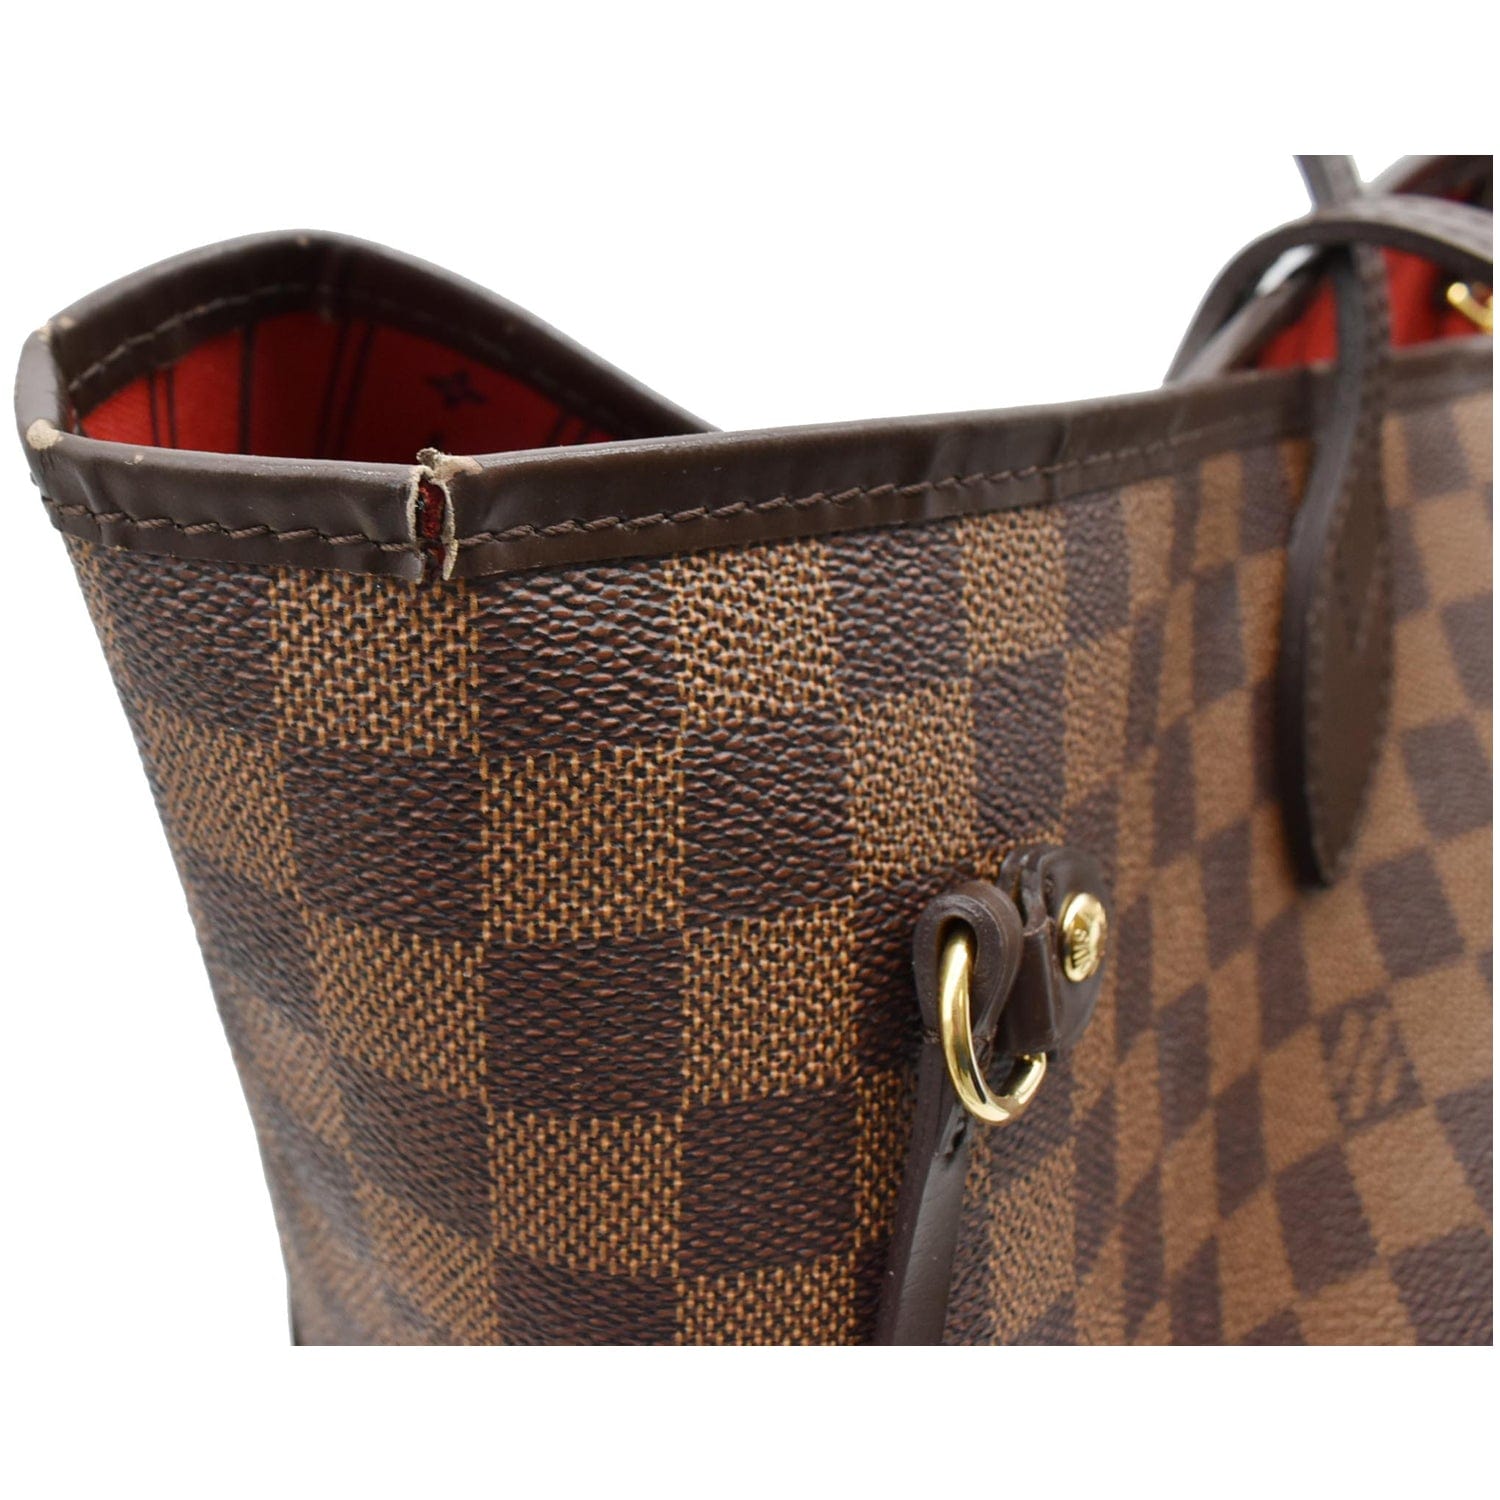 Neverfull leather tote Louis Vuitton Brown in Leather - 31575232